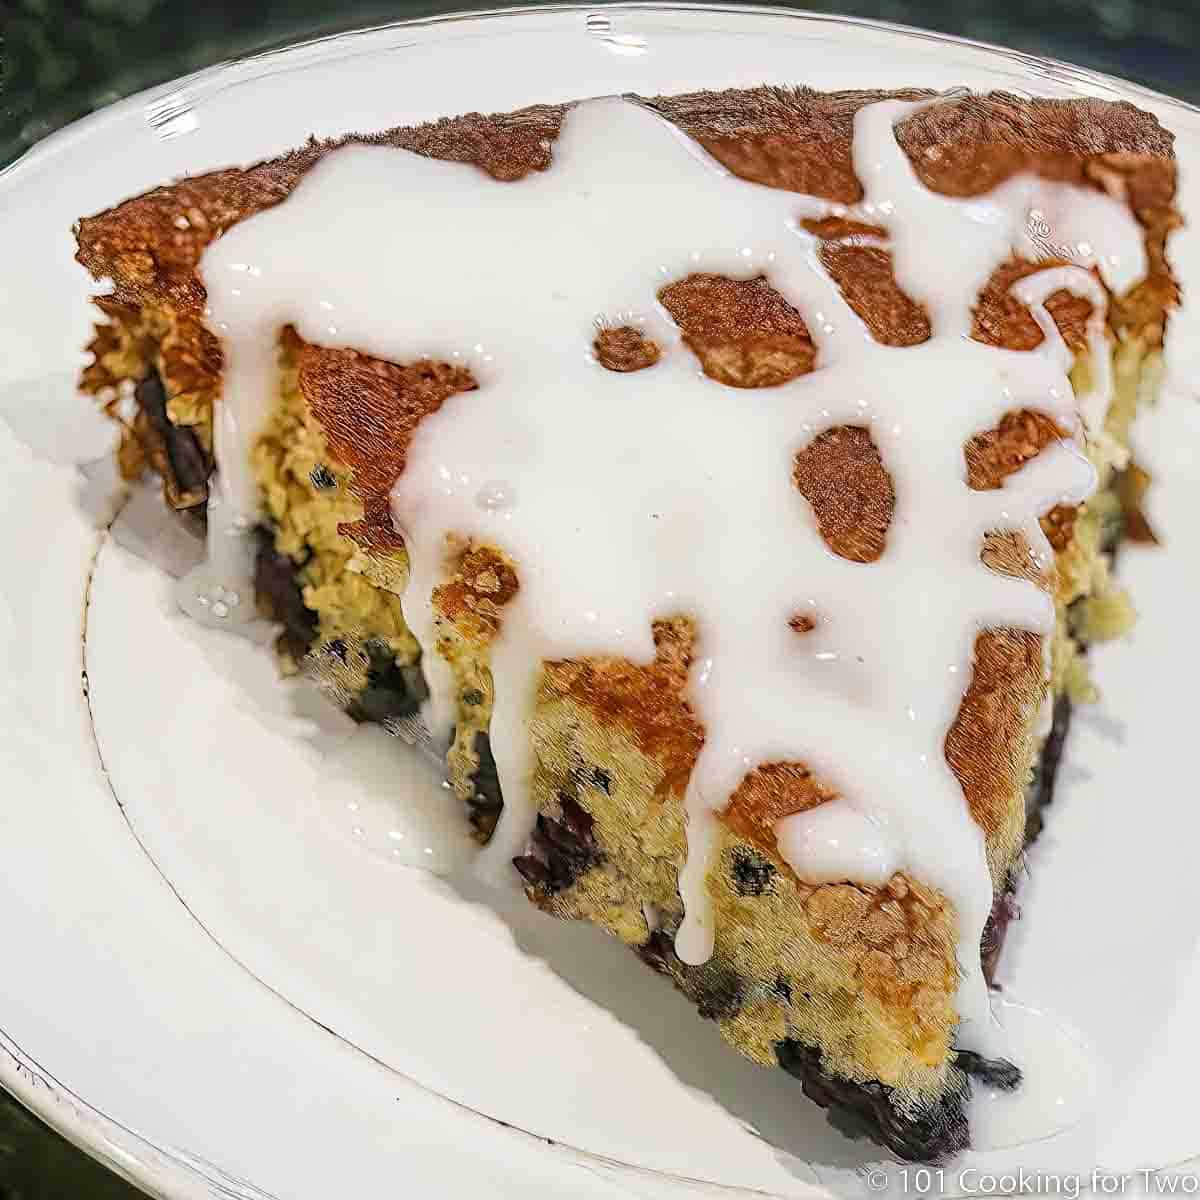 Blueberry cake on white plate